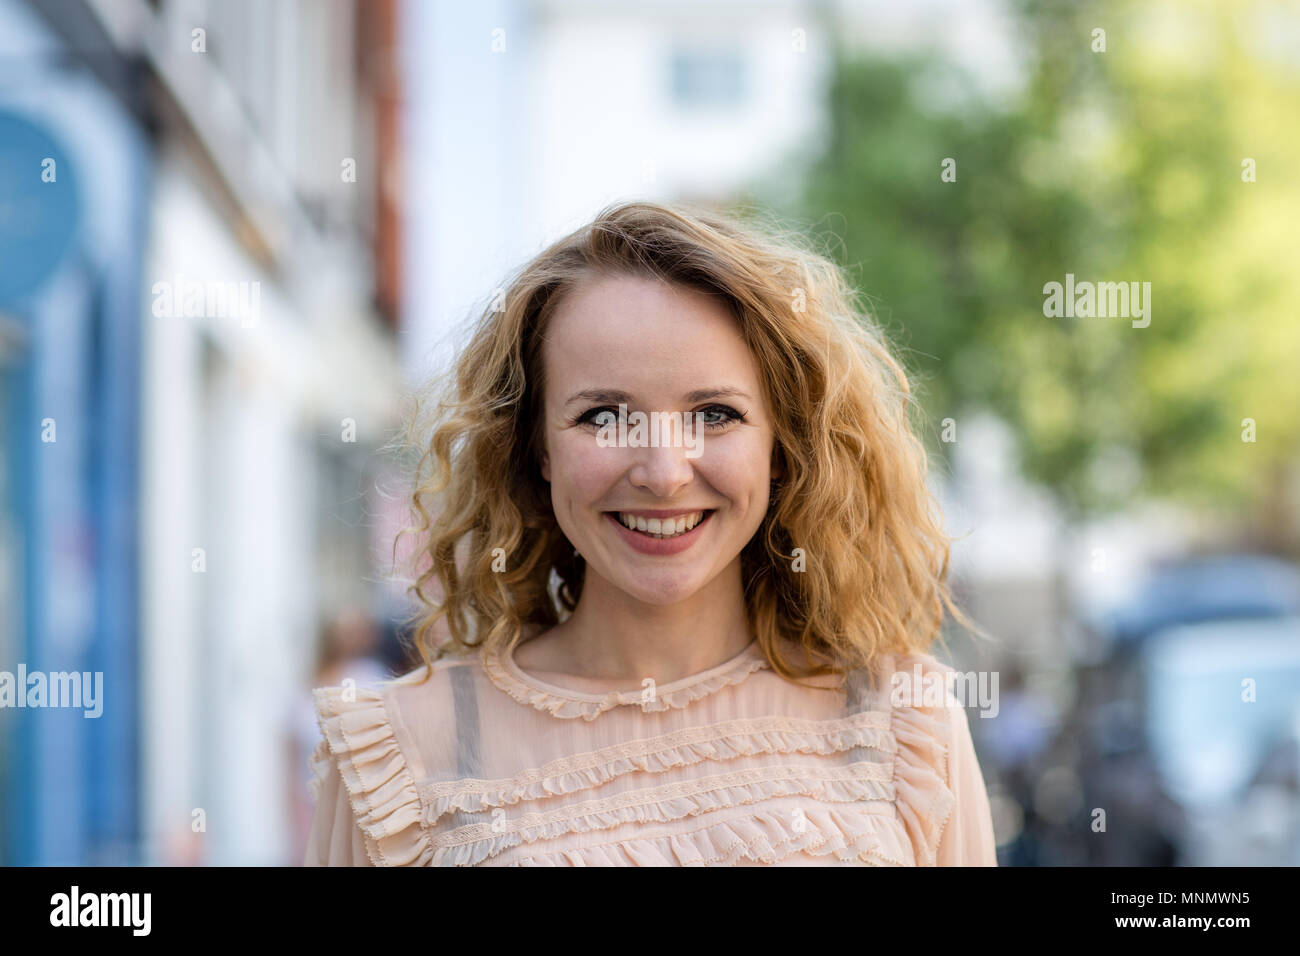 Adult female smiling to camera outdoors in city Stock Photo